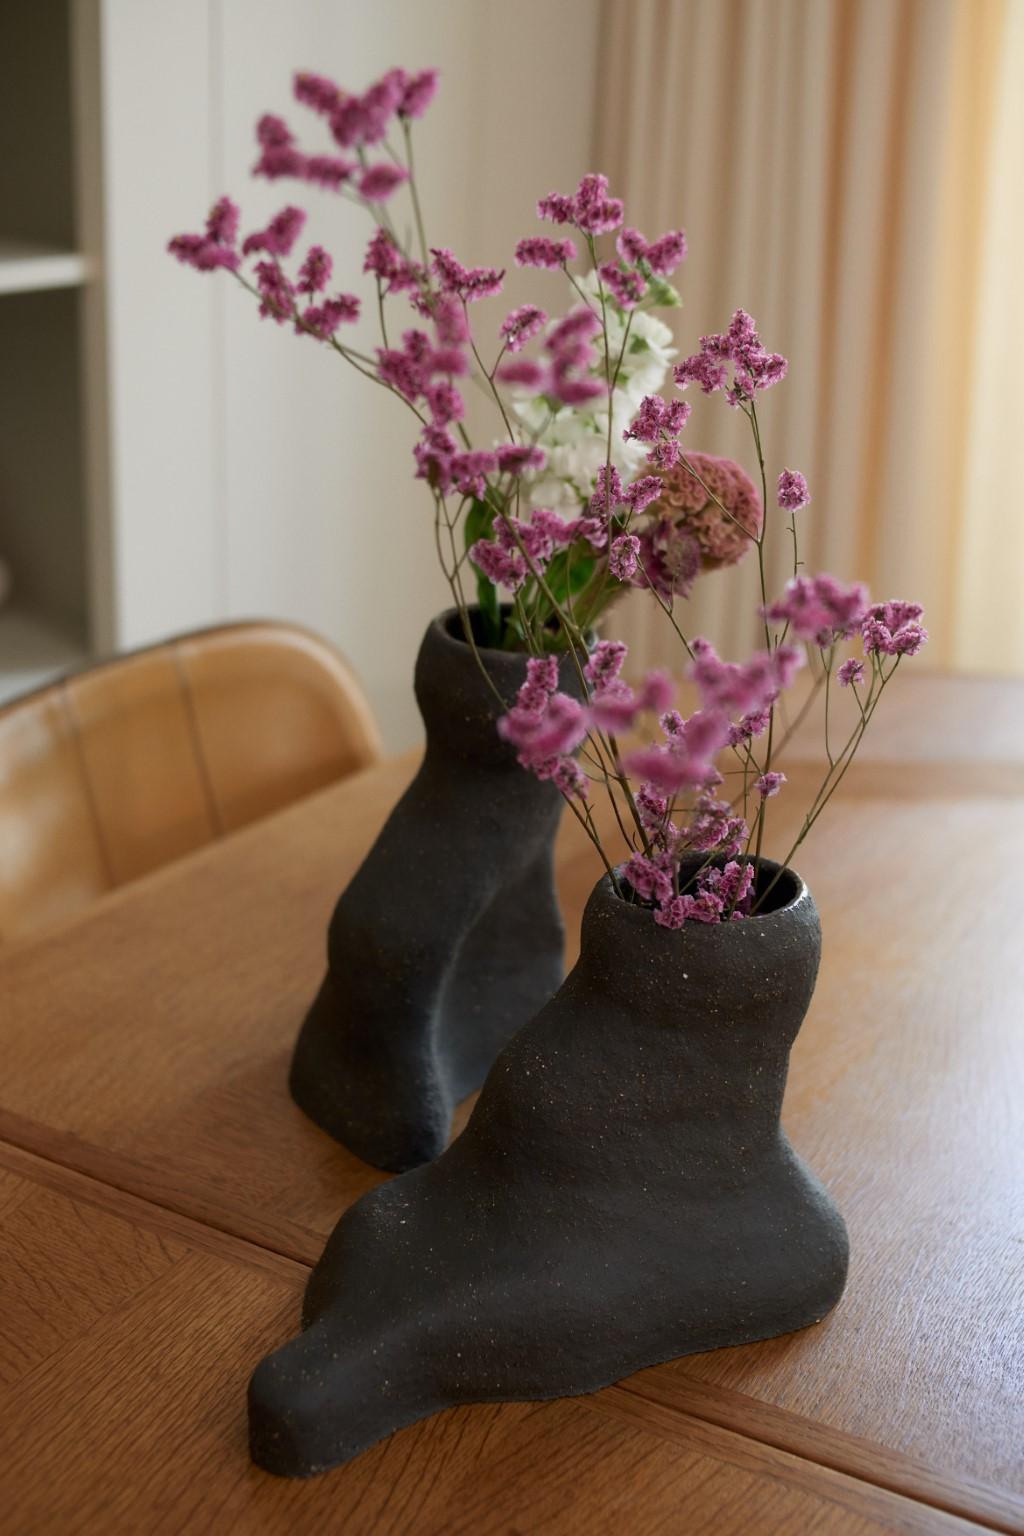 Set of 2 Granite Duo vases by Sophie Parachey
Dimensions: W 23 x D 14 x H 33 cm, W 26 x D 13 x H 18 cm
Materials: Black textured stoneware (large chamotte).

Inspired by extended stays in Central America, Sophie Parachey’s work questions